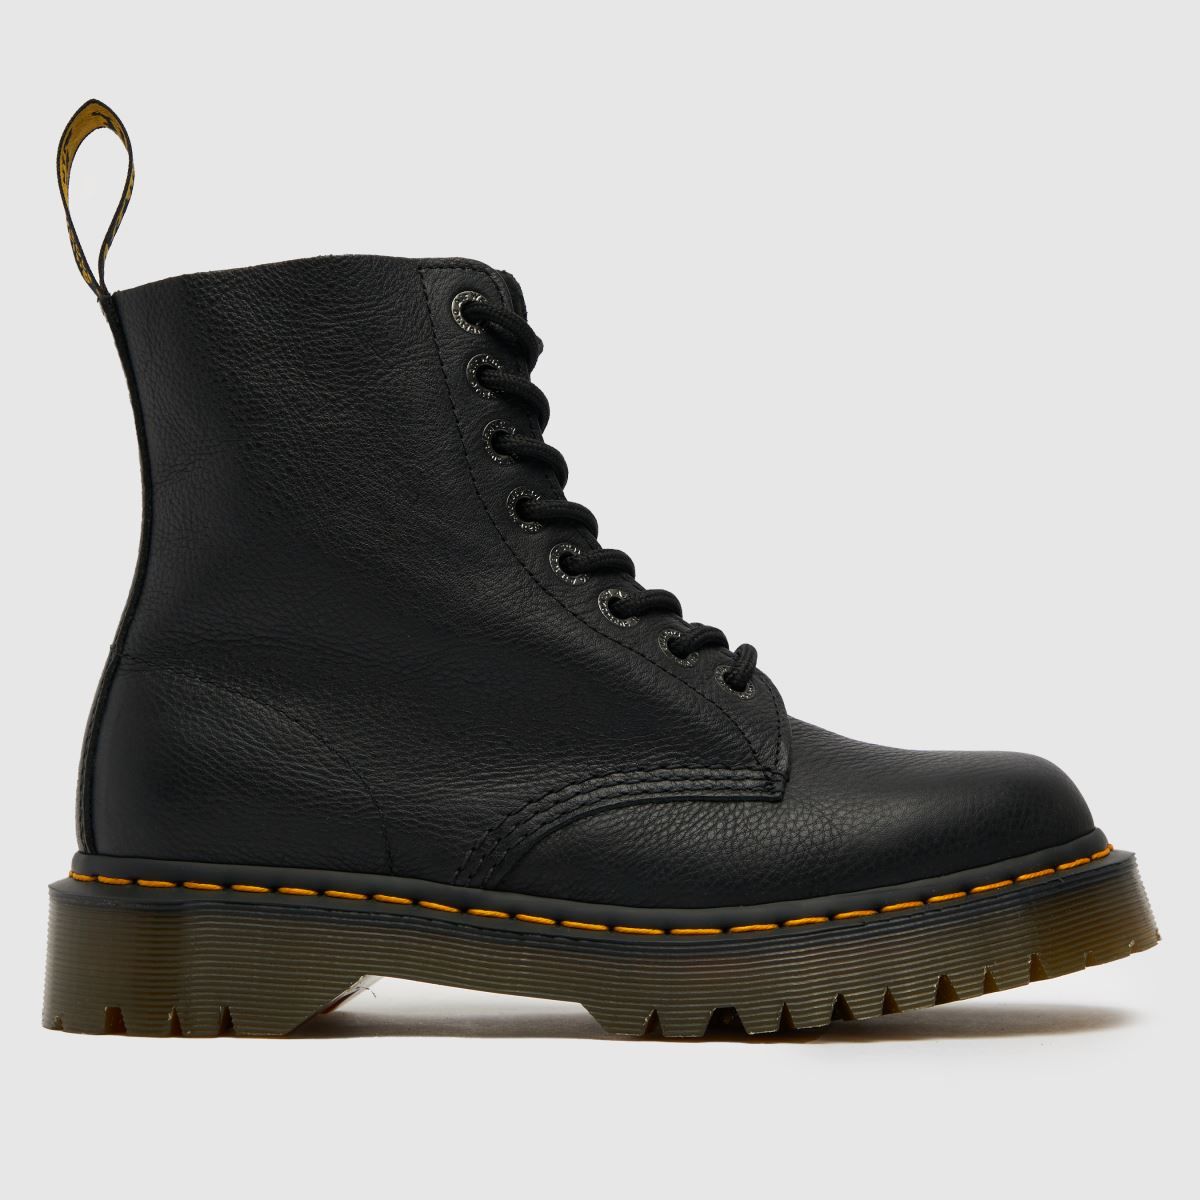 Dr Martens 1460 pascal bex 8 eye boots in black | Schuh